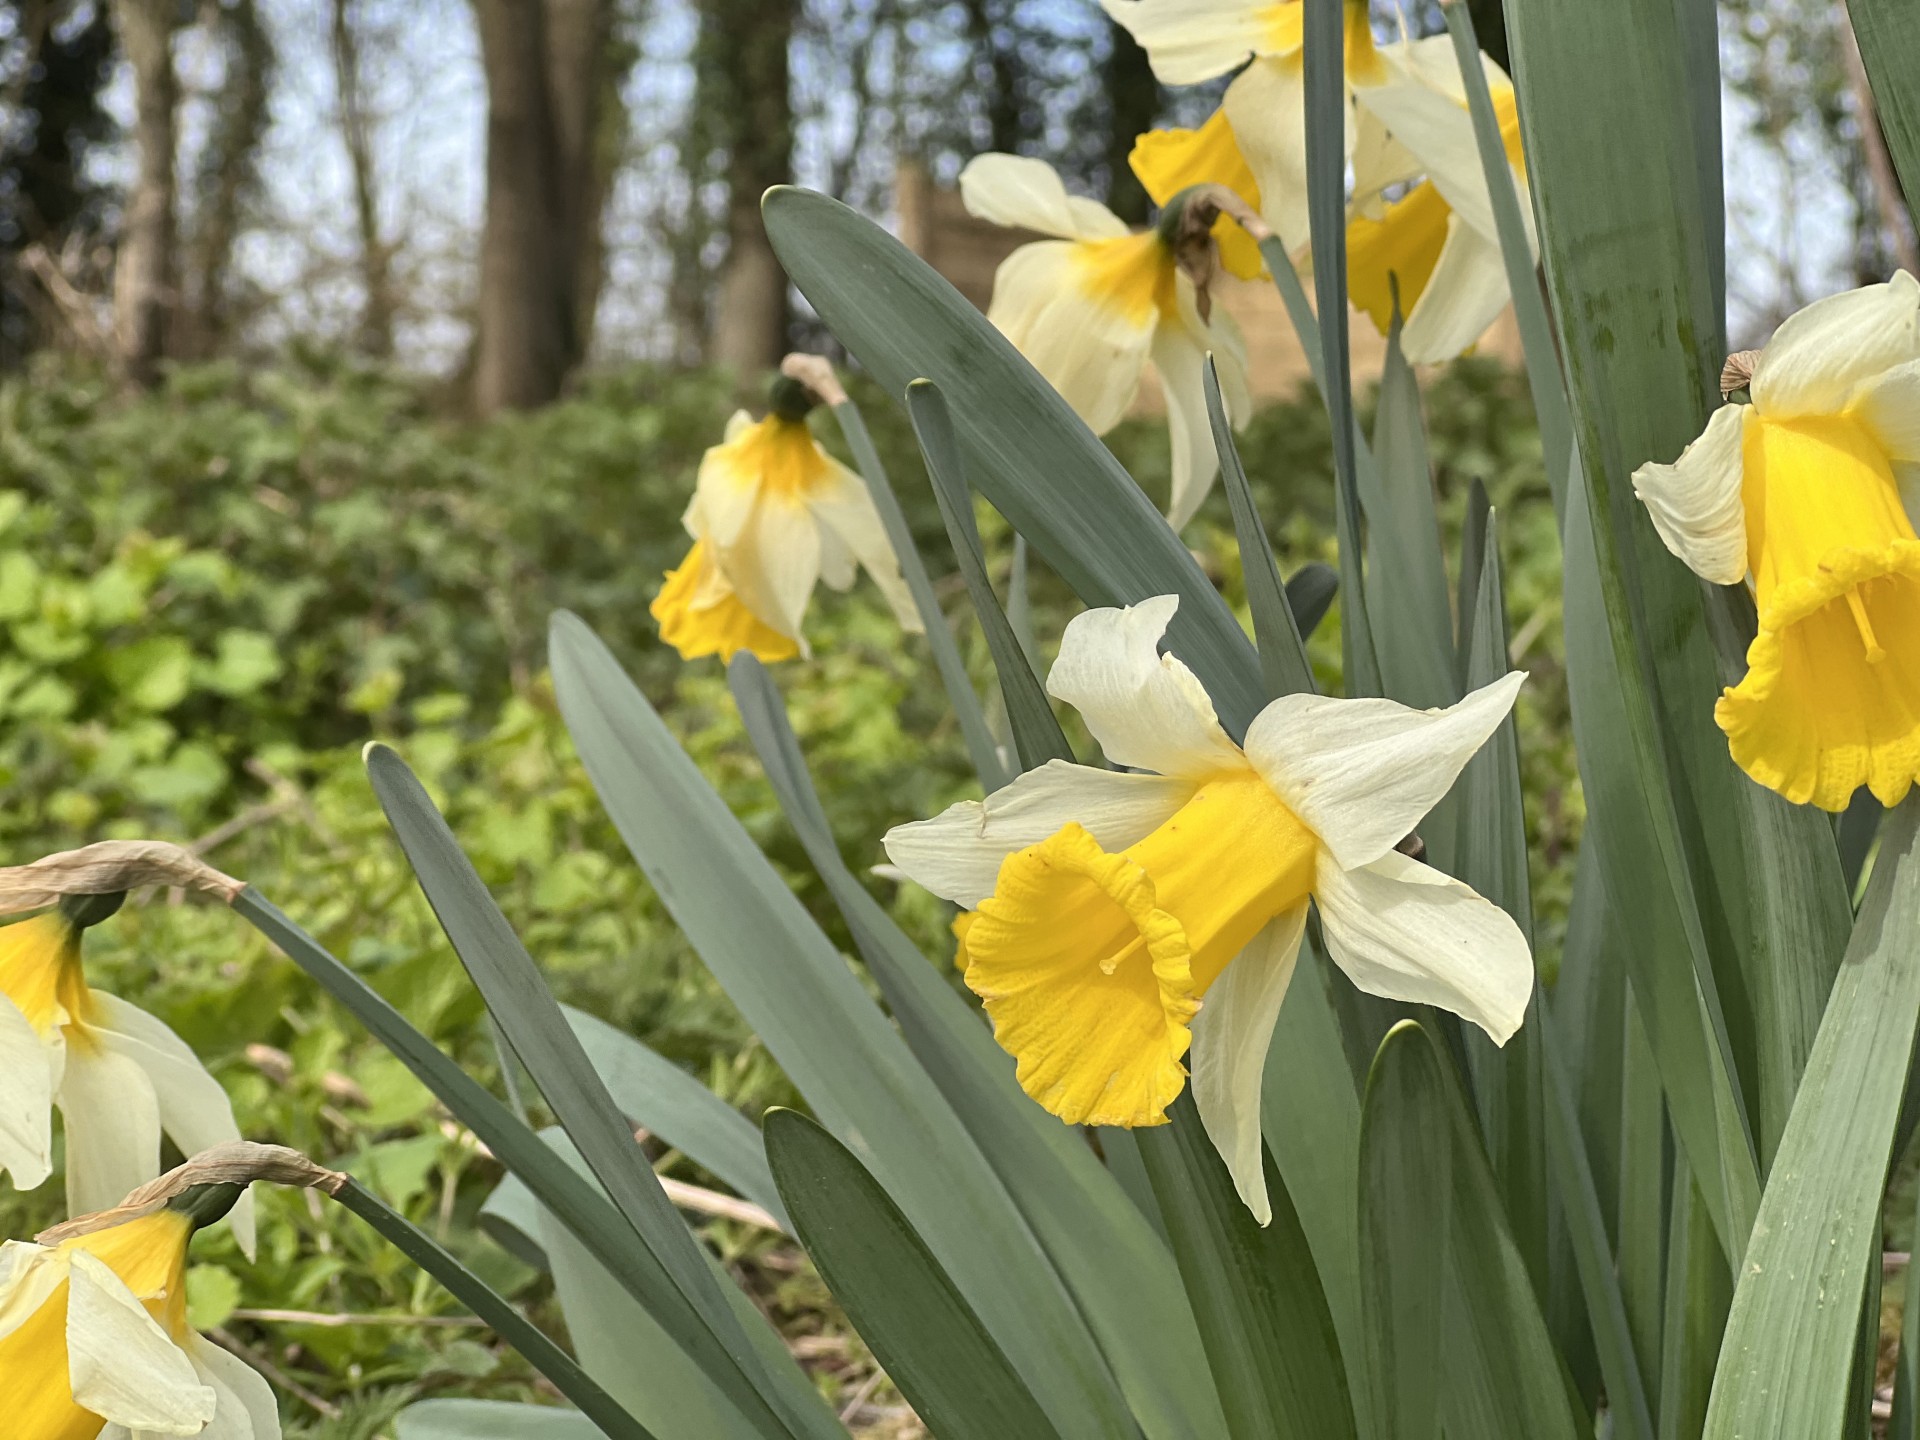 Daffodils at Hollyhocks Private Eco Retreat glamping site in Suffolk.